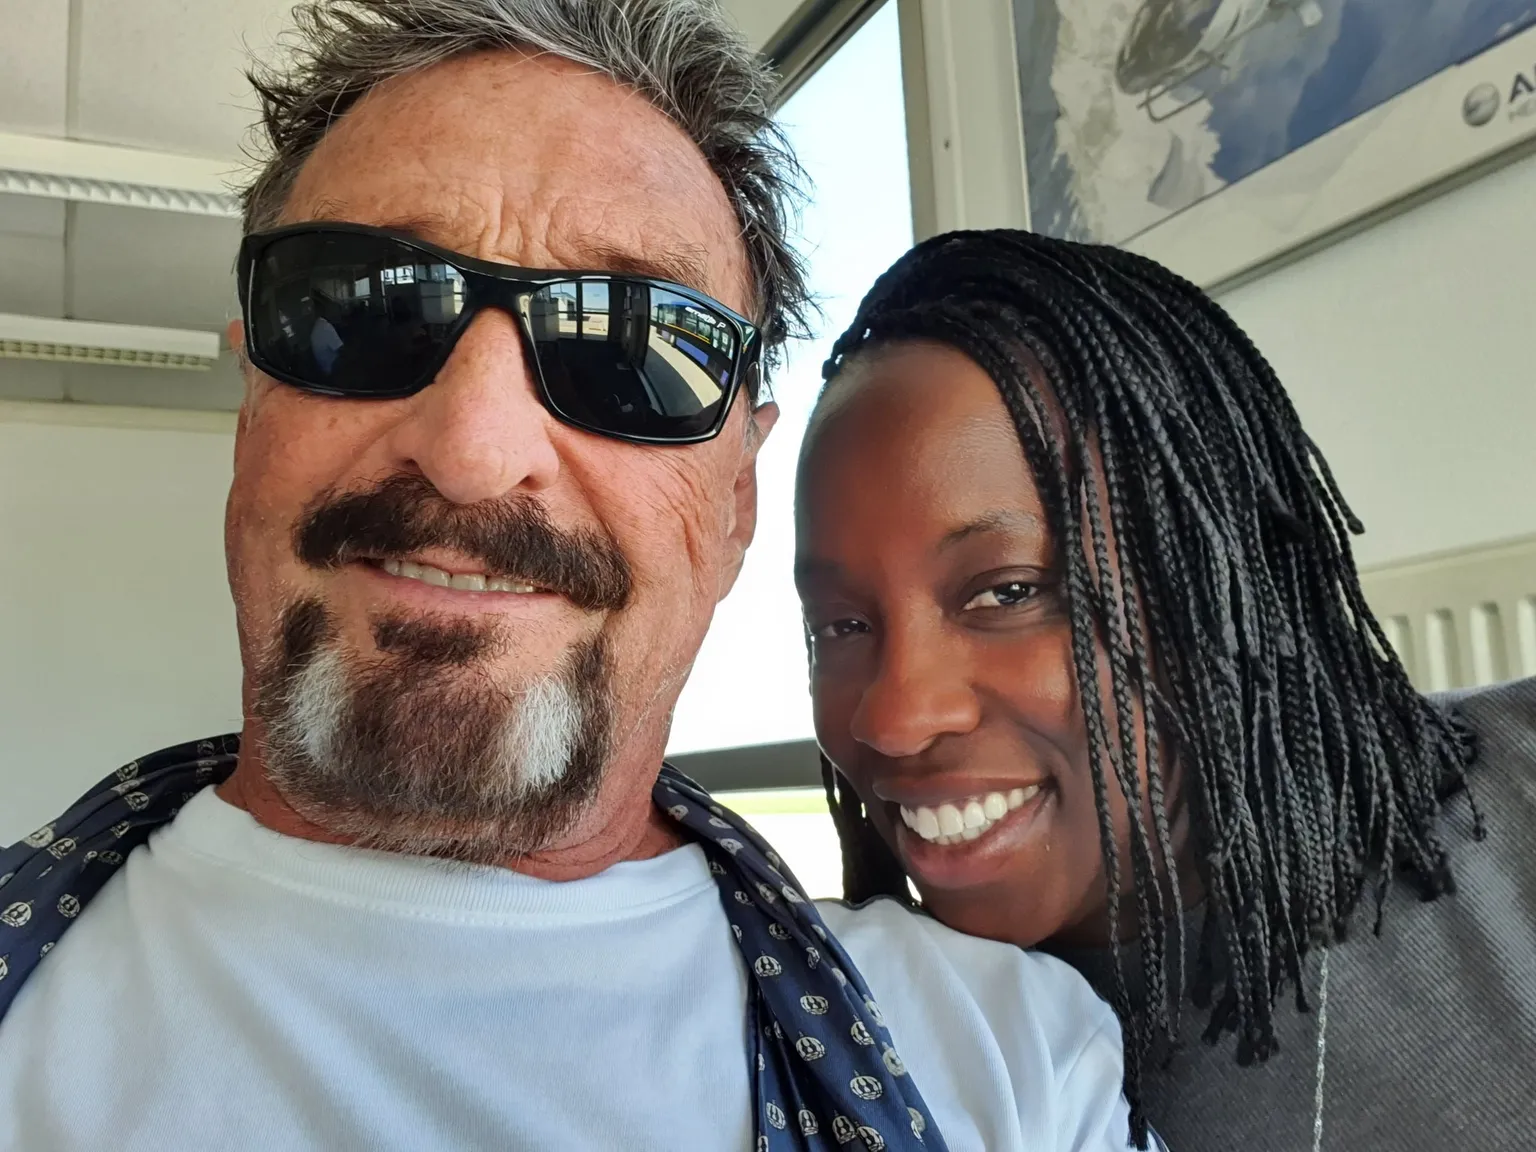 John McAfee and his wife